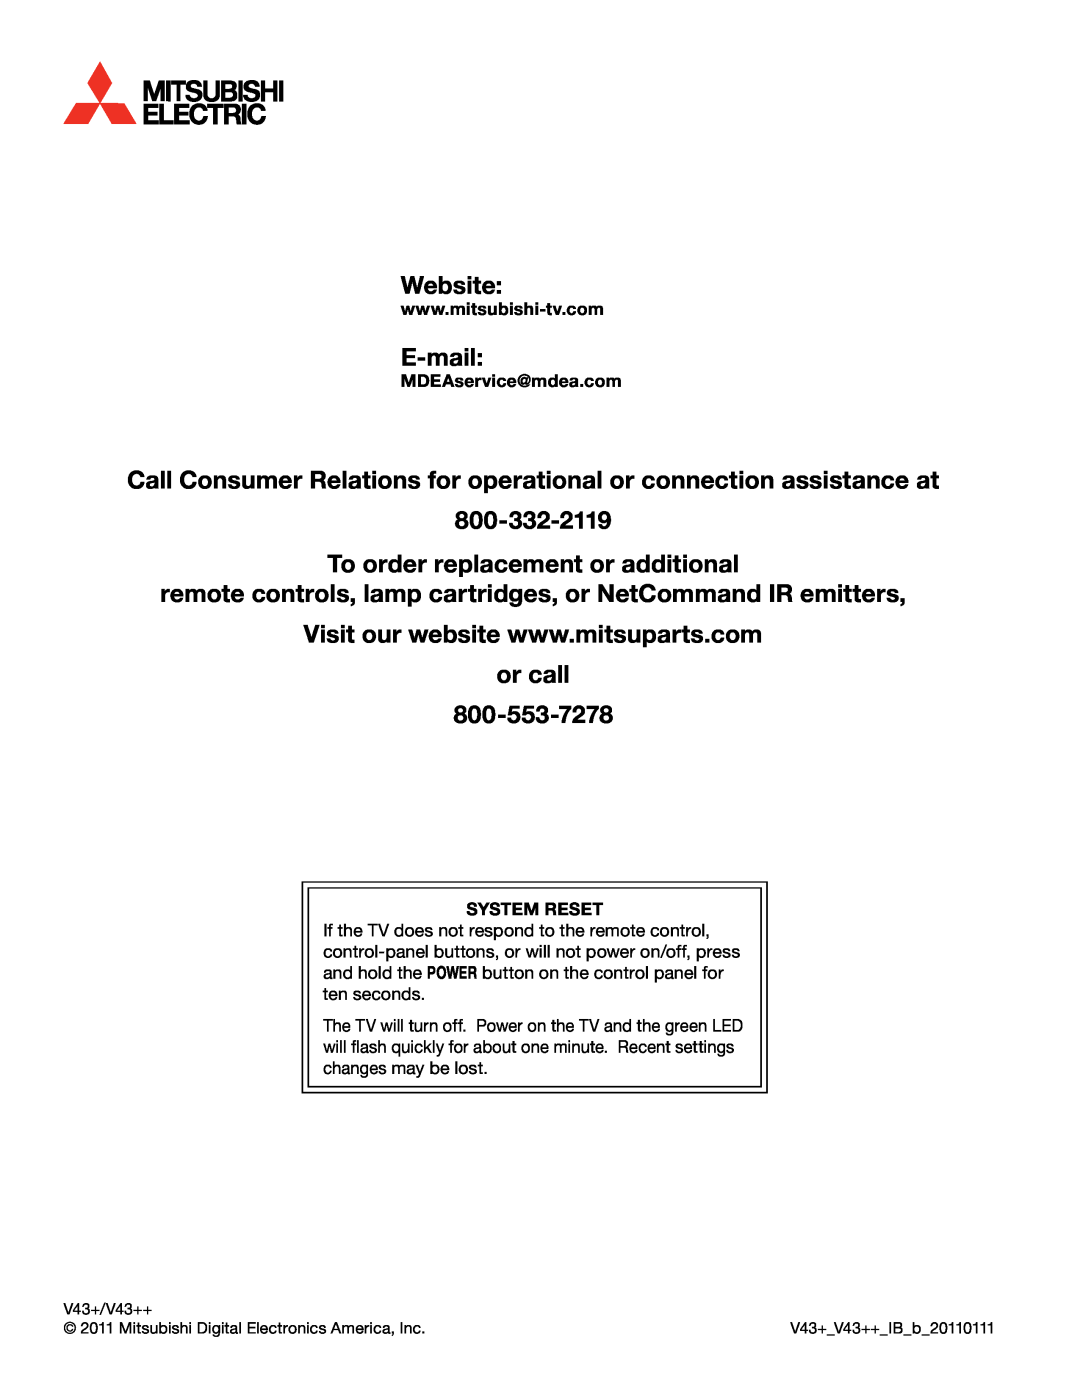 Mitsubishi Electronics 838 SERIES Website, E-mail, Call Consumer Relations for operational or connection assistance at 